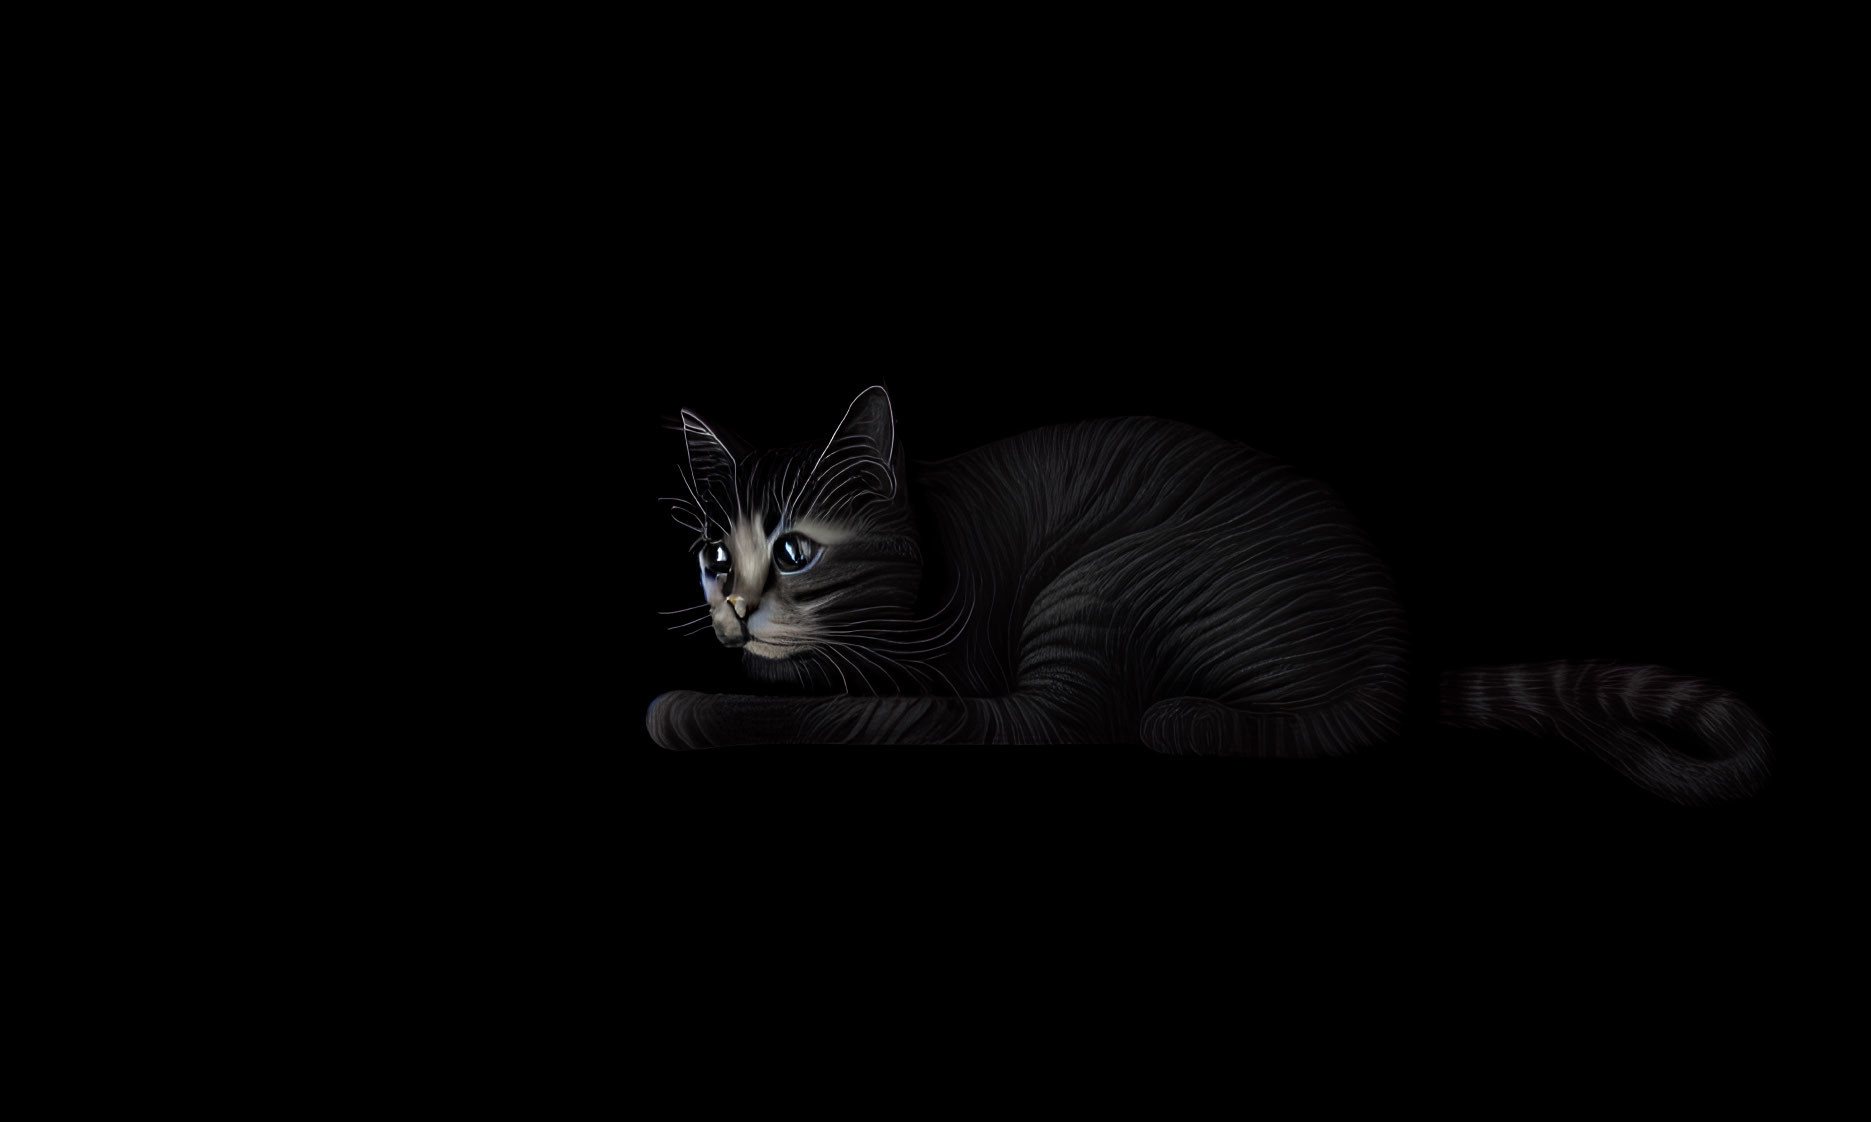 Striking Black Cat with White Whiskers and Blue Eyes on Black Background